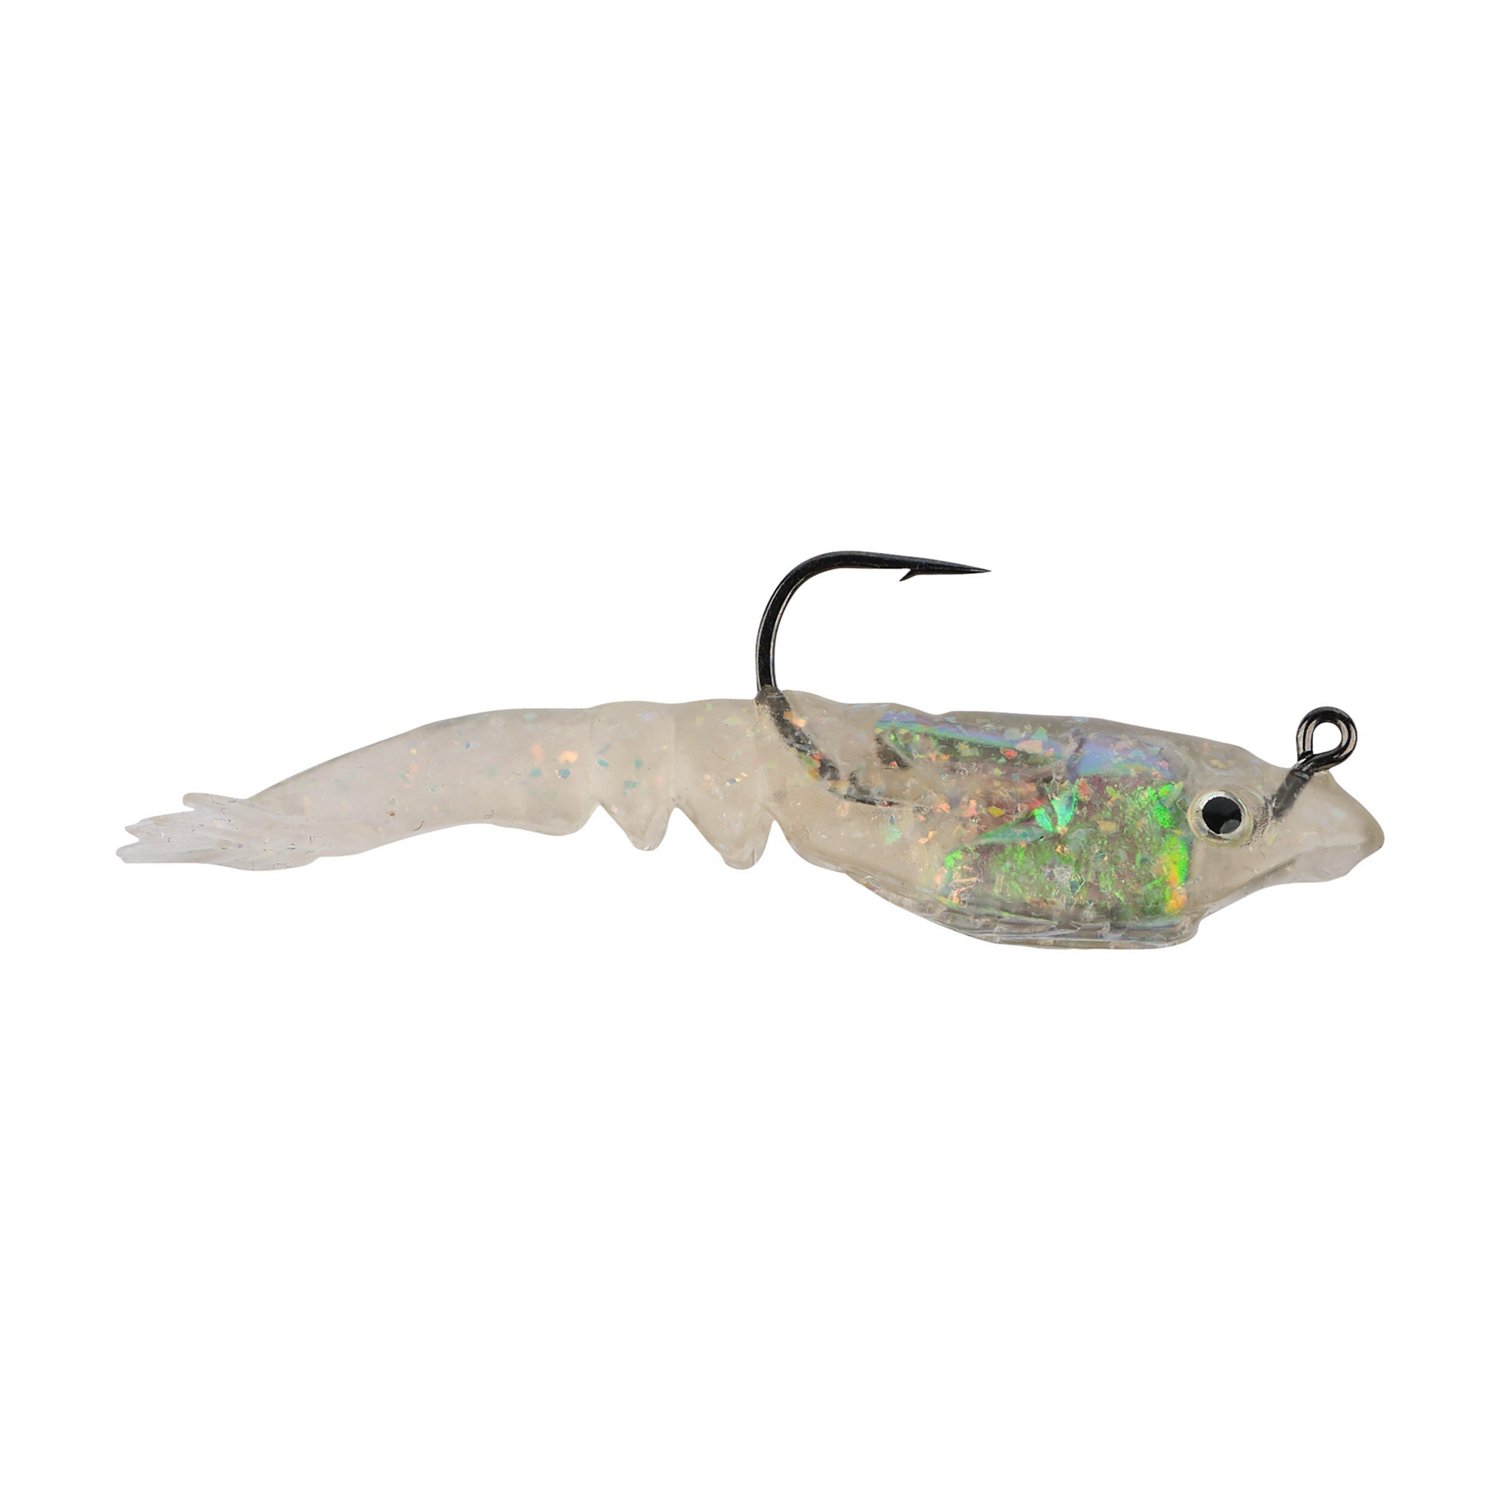 https://academy.scene7.com/is/image/academy//baits---lures/berkley-powerbait-saltwater-rattle-shrimp-baits-3-pack-swcrs3-cca-white/b74a1ec539af4653990cd05a3ee53b84